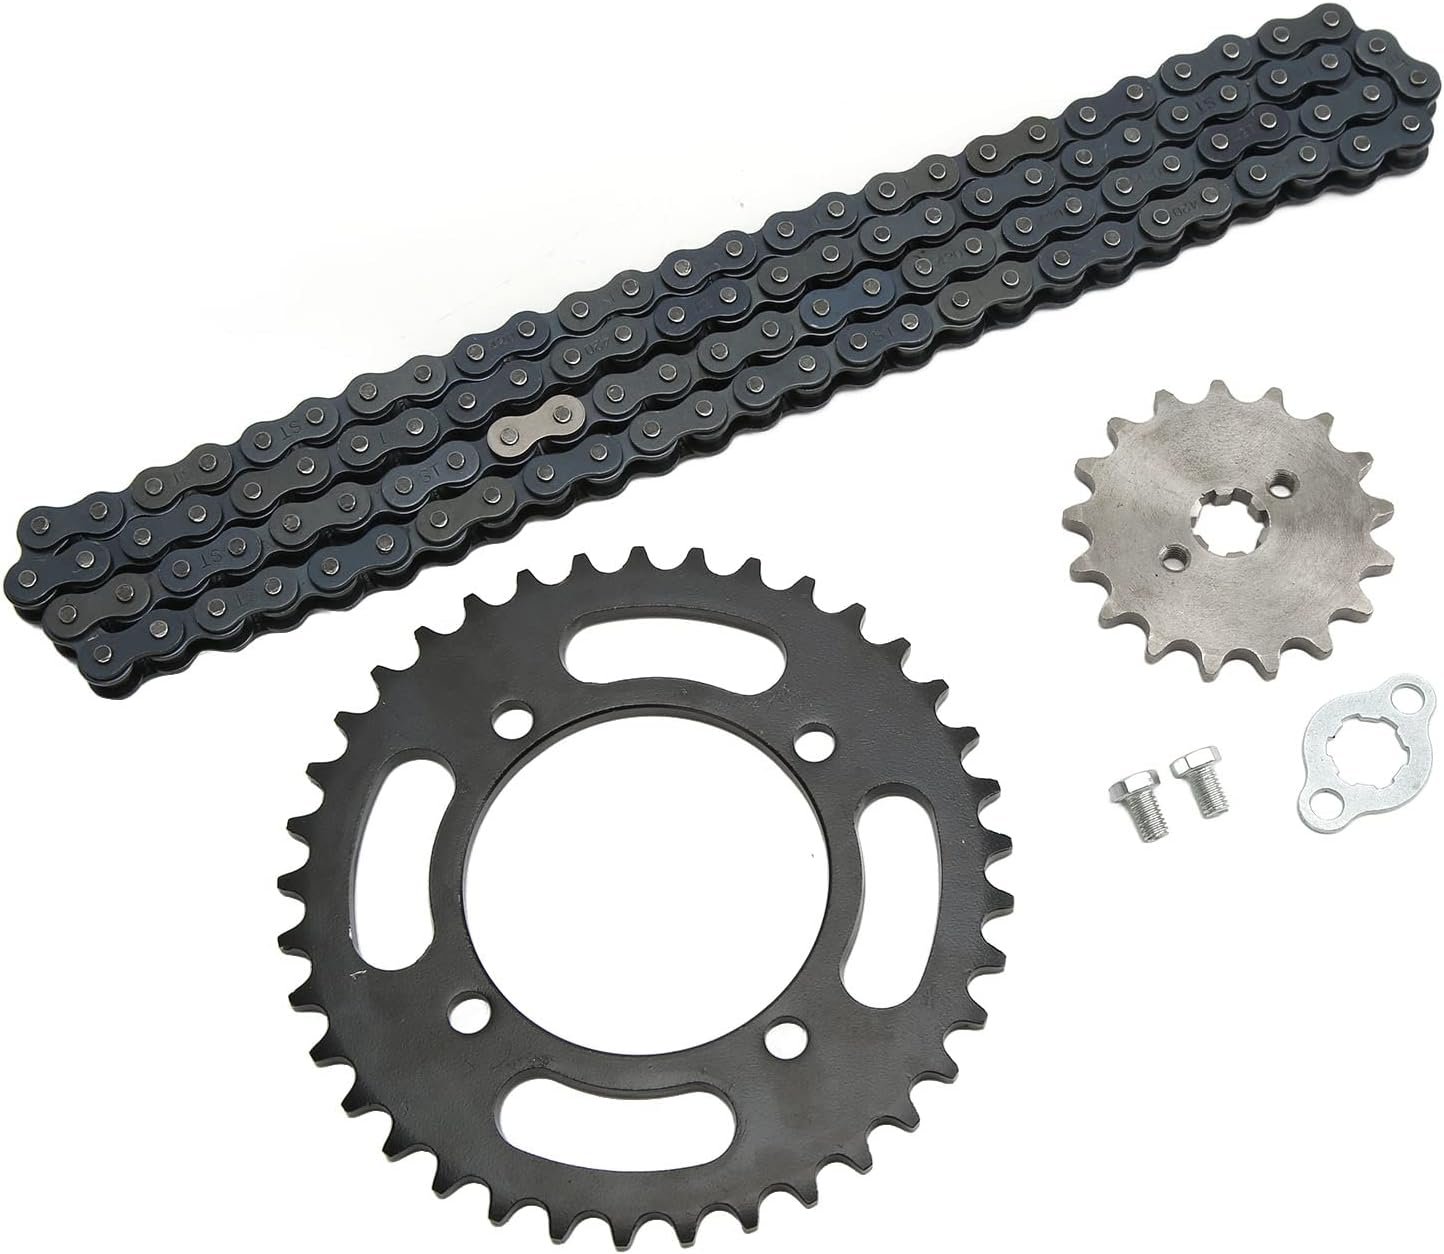 420 Chain Sprocket Kit review